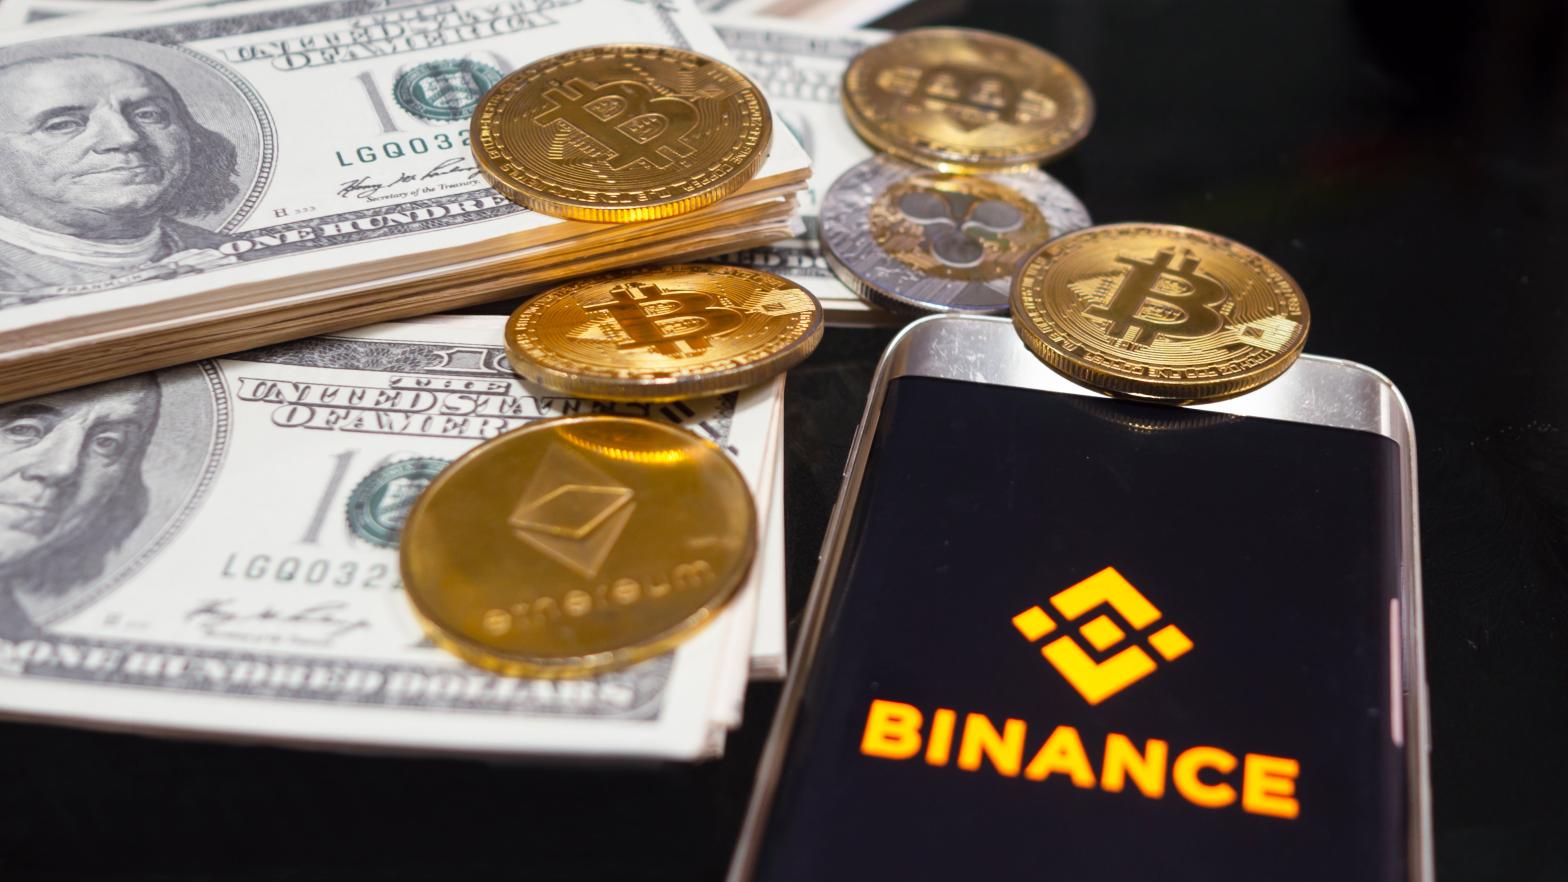 Binance.US is ostensibly separate from the main Binance brand, but recent reports have shown that Binance CEO Changpeng Zhao has used the U.S.-based exchange for funds. (Photo: K.unshu, Shutterstock)